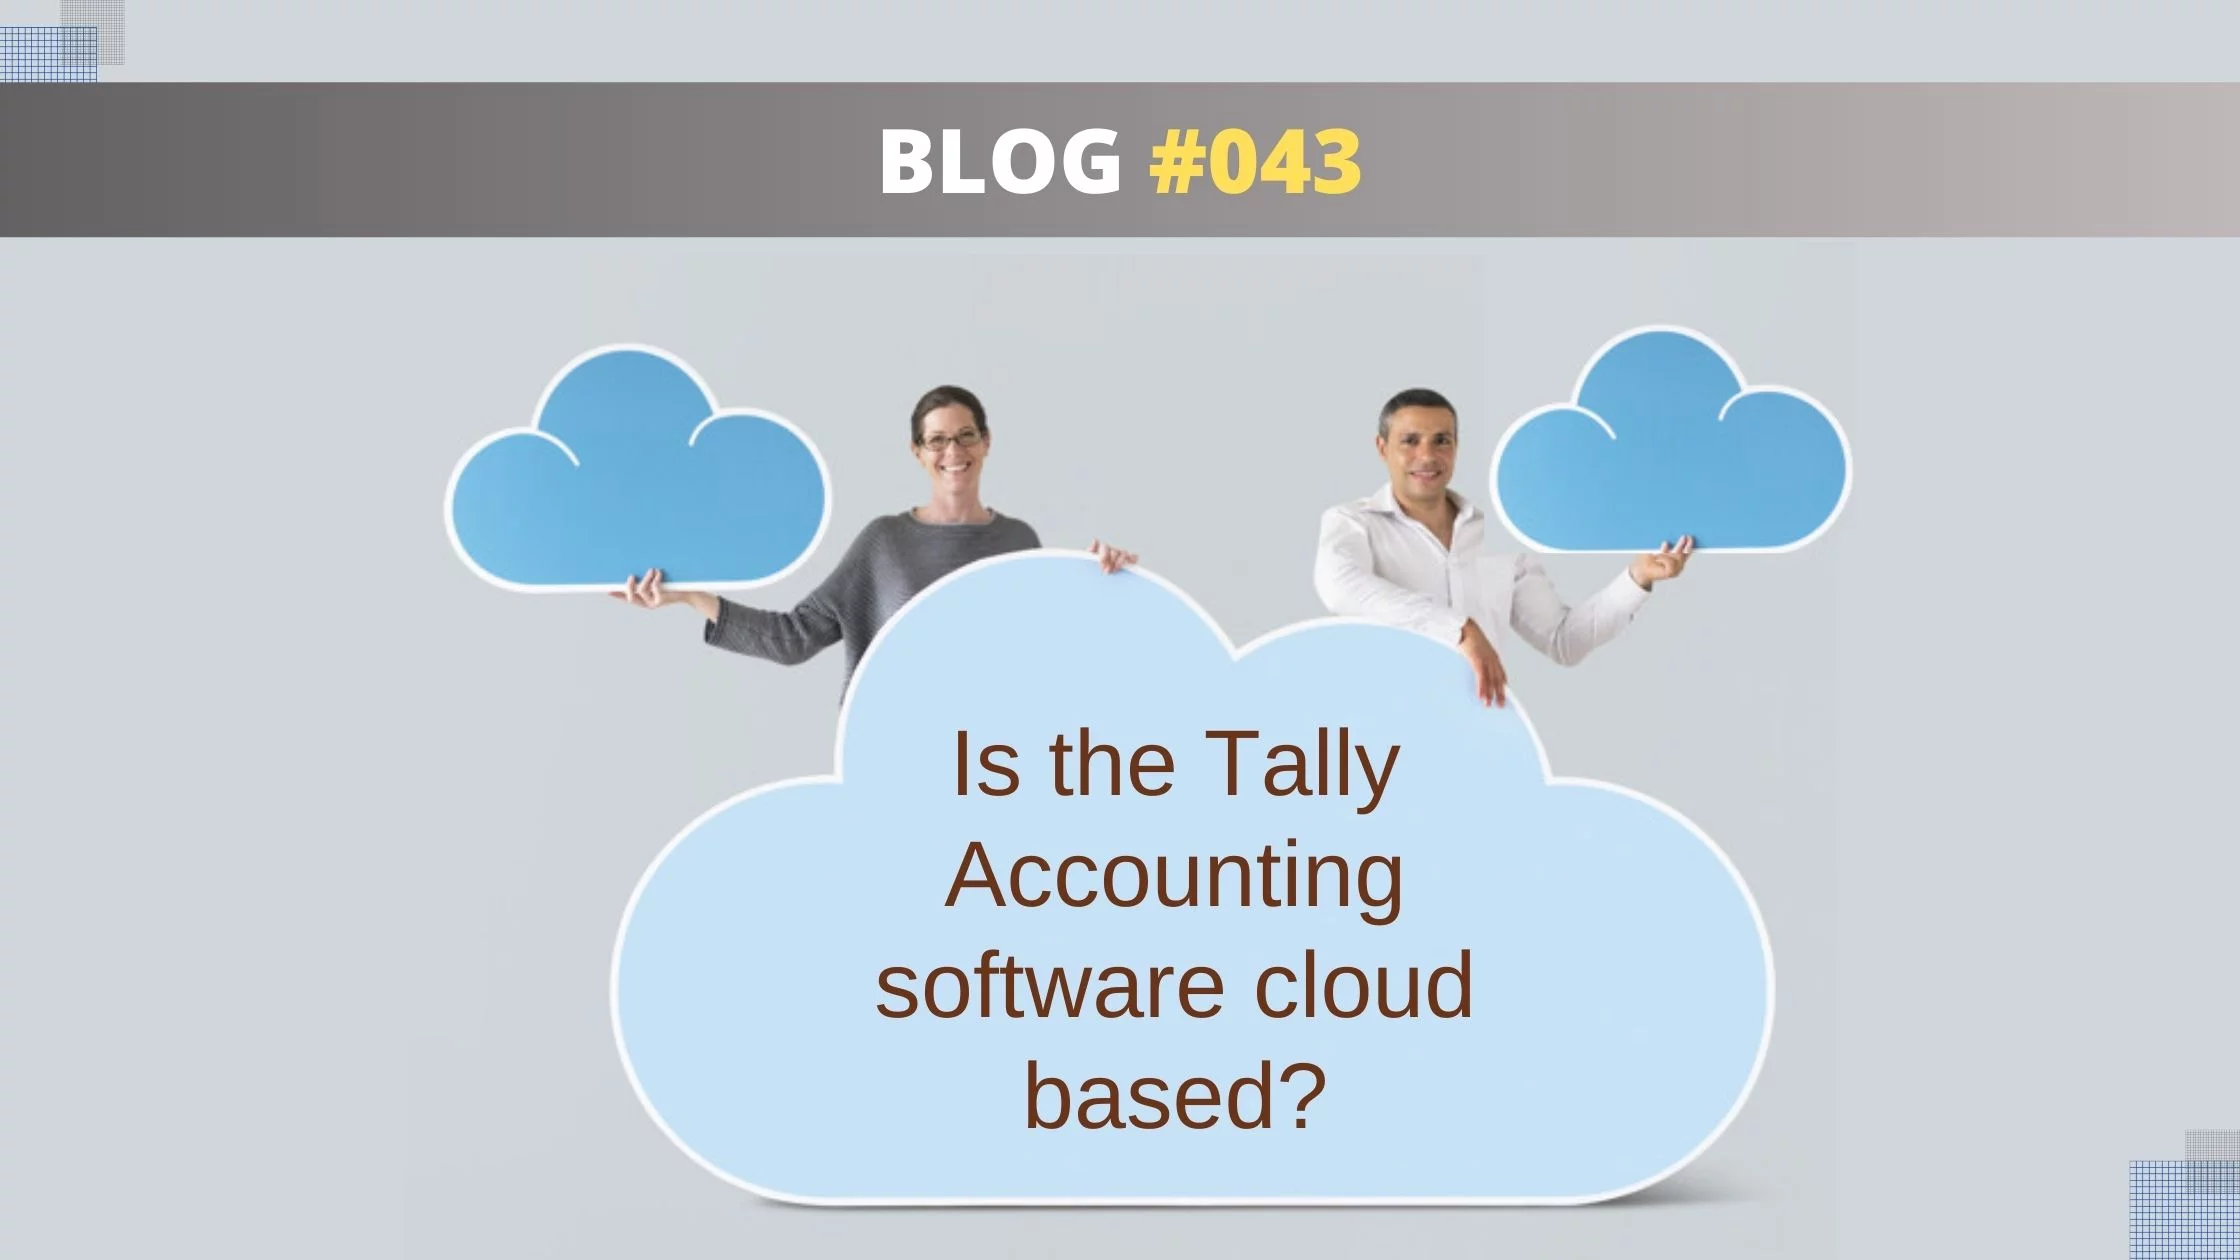 Tally software cloud based